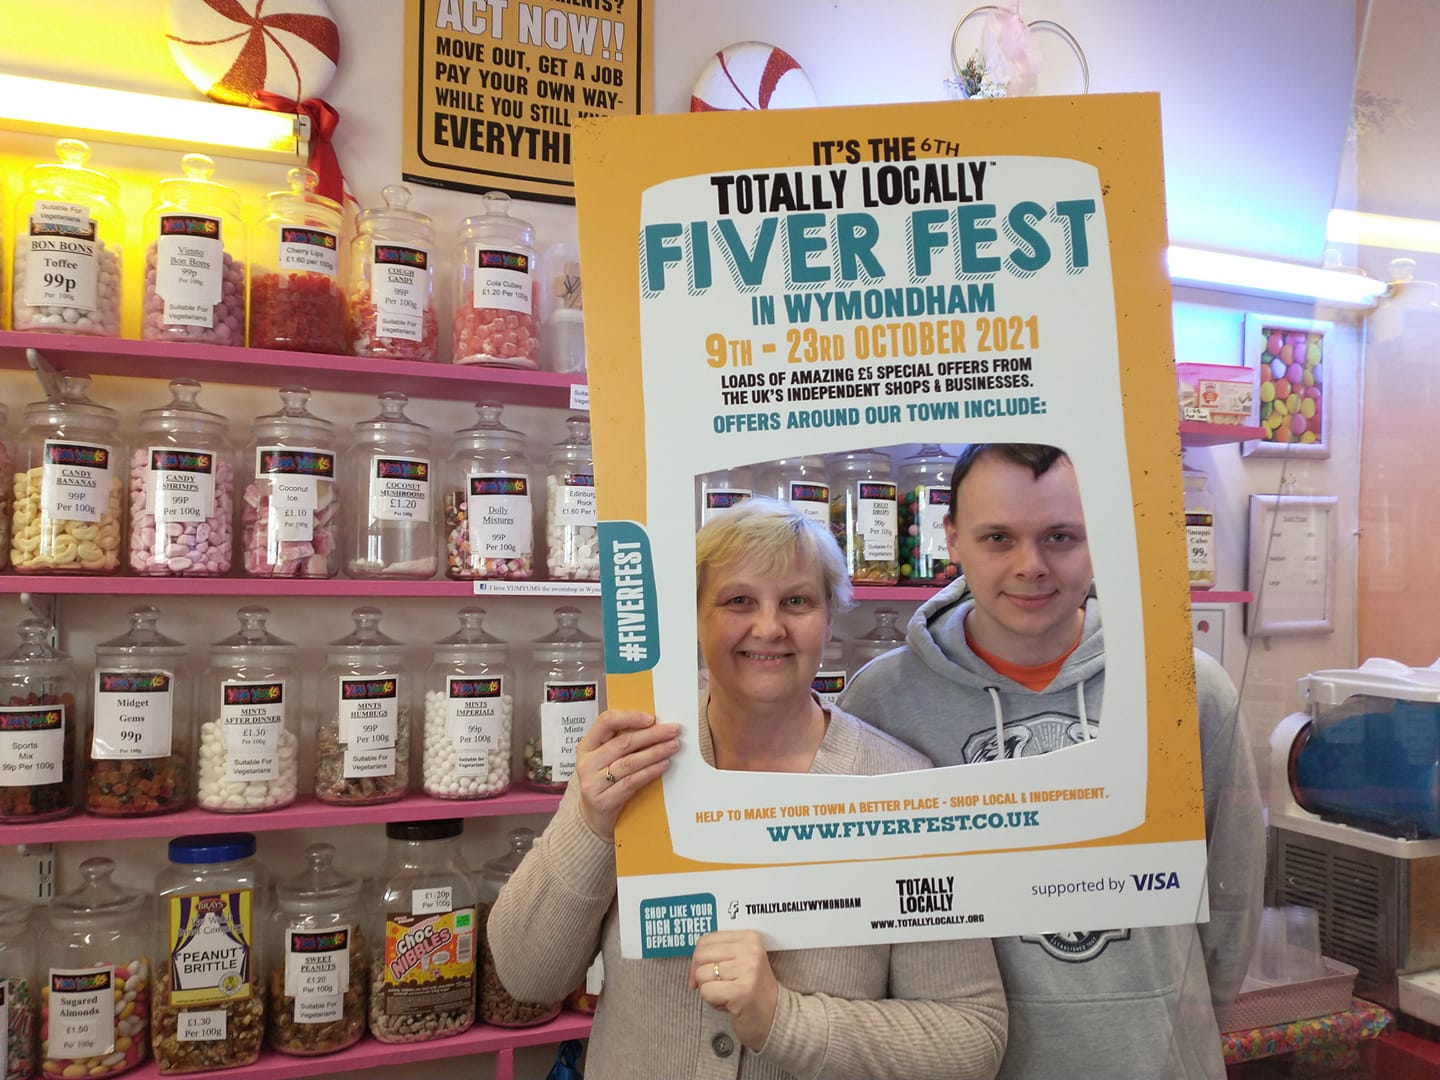 Two shopkeepers pose in Totally Locally cardboard frame